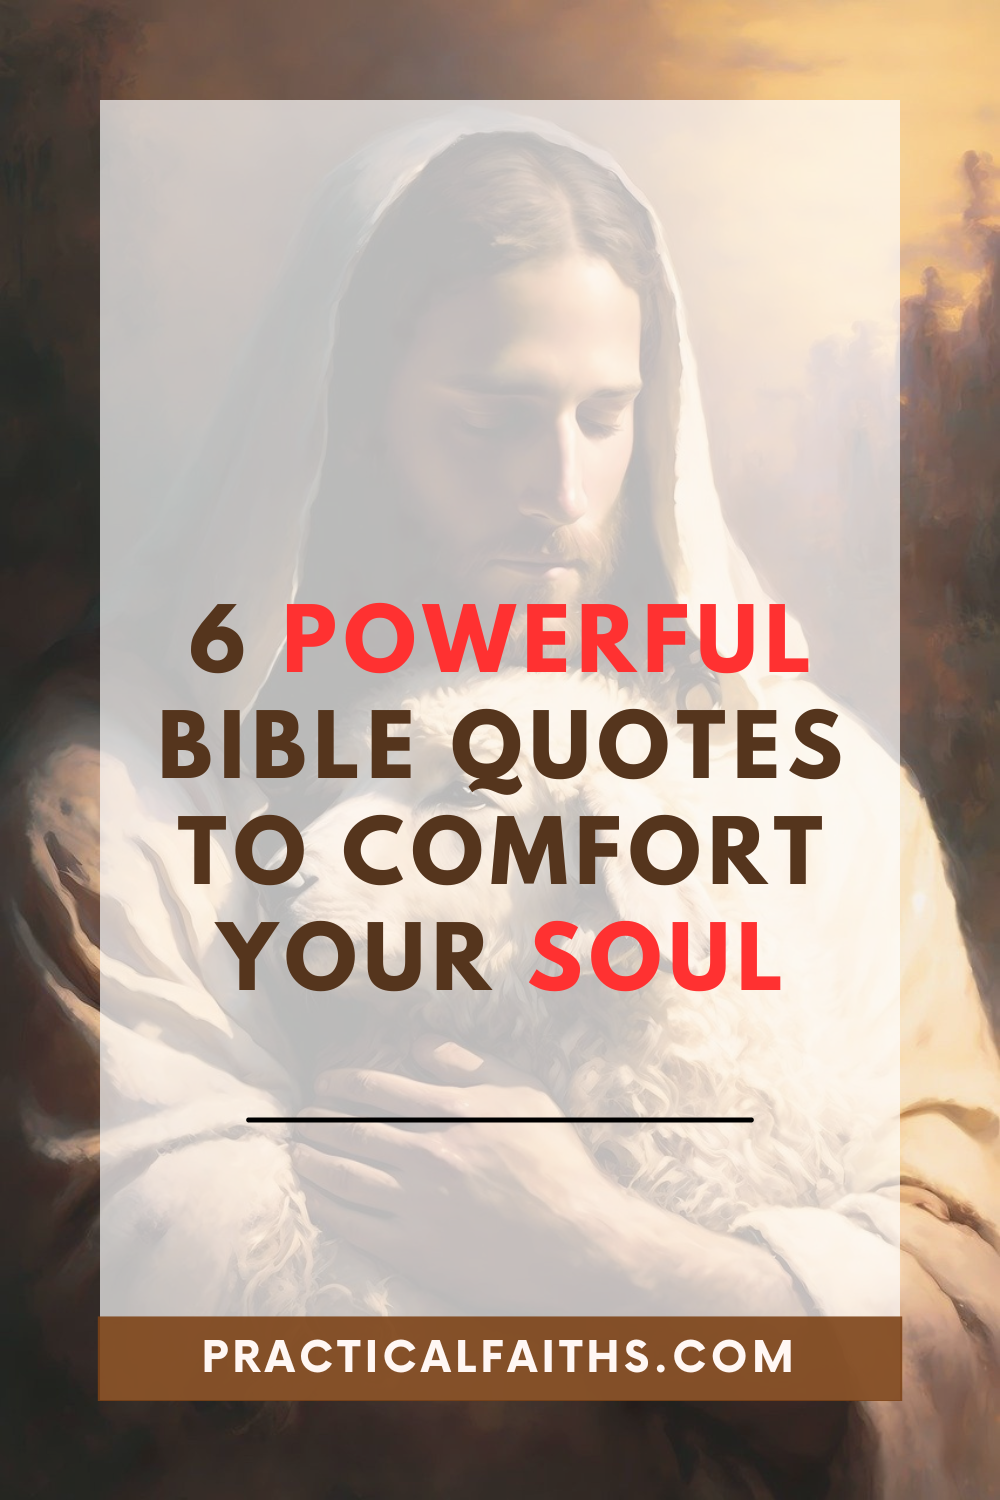 6 Powerful Bible Quotes to Comfort Your Soul